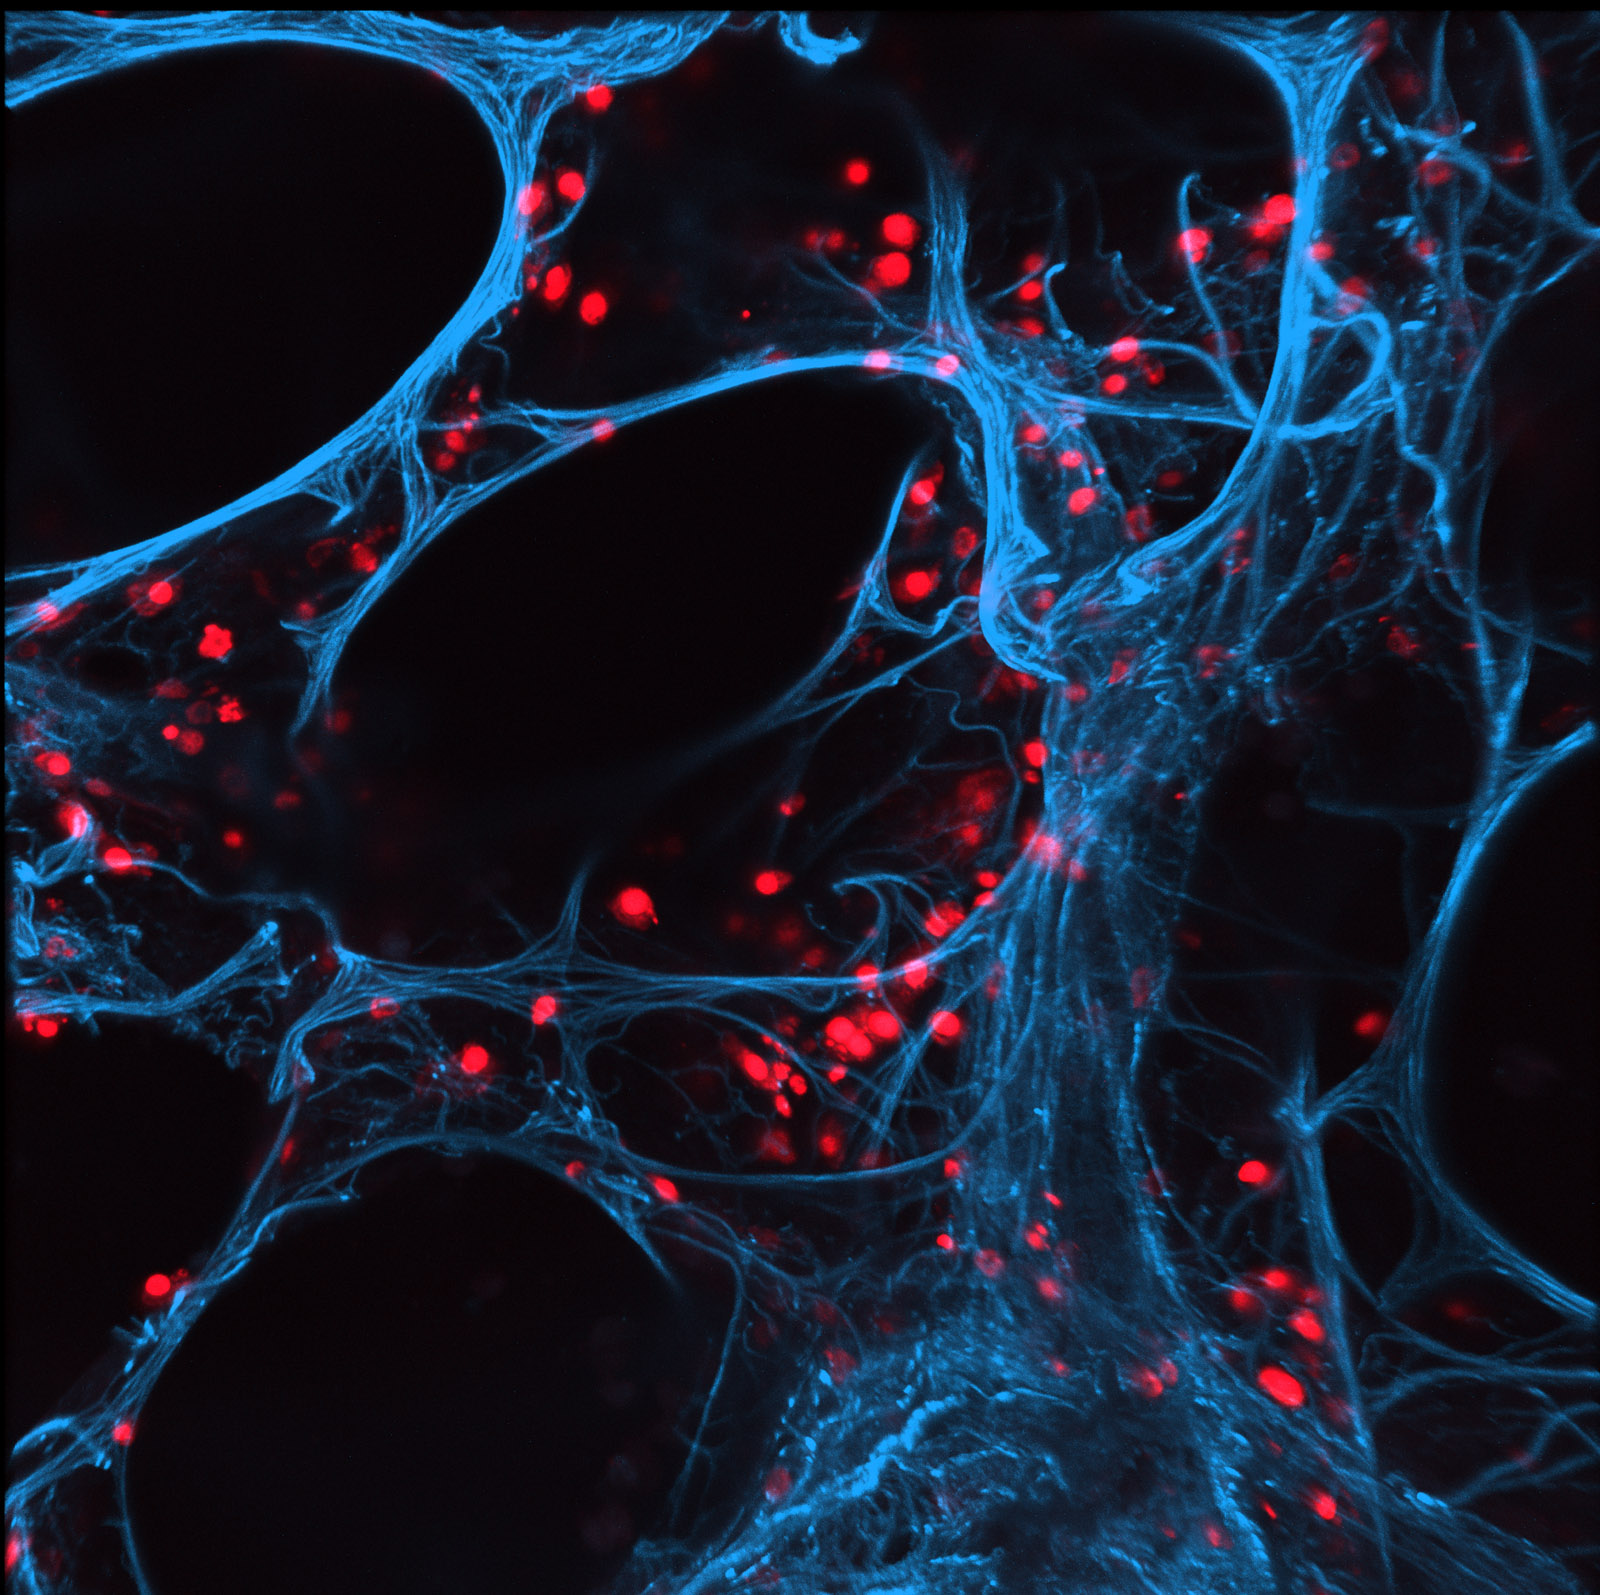 To prove the efficacy of new active substances, Fraunhofer researchers also use vital human lung slices, known as precision-cut lung slices (blue), which can be infected with influenza viruses (red) as shown here.